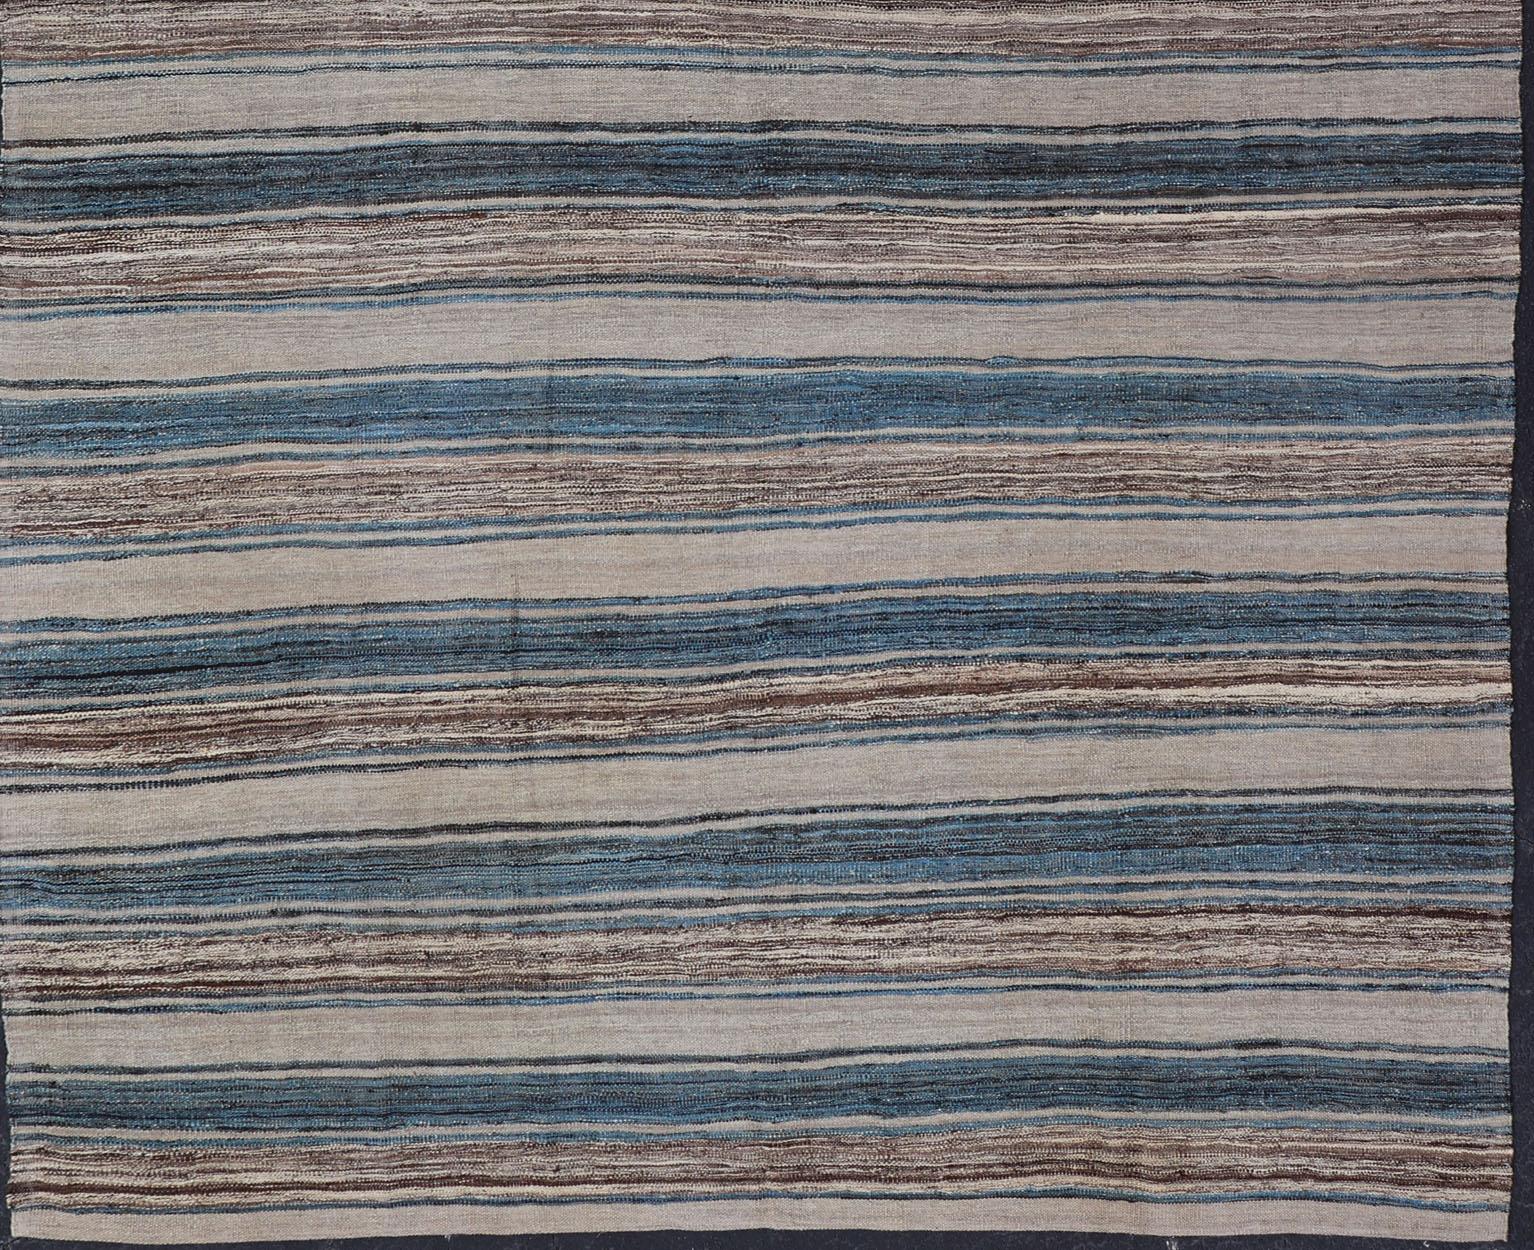 Hand-Woven Versatile Striped Design and Natural Brown, Cream, and Blue Flat-Weave Kilim For Sale